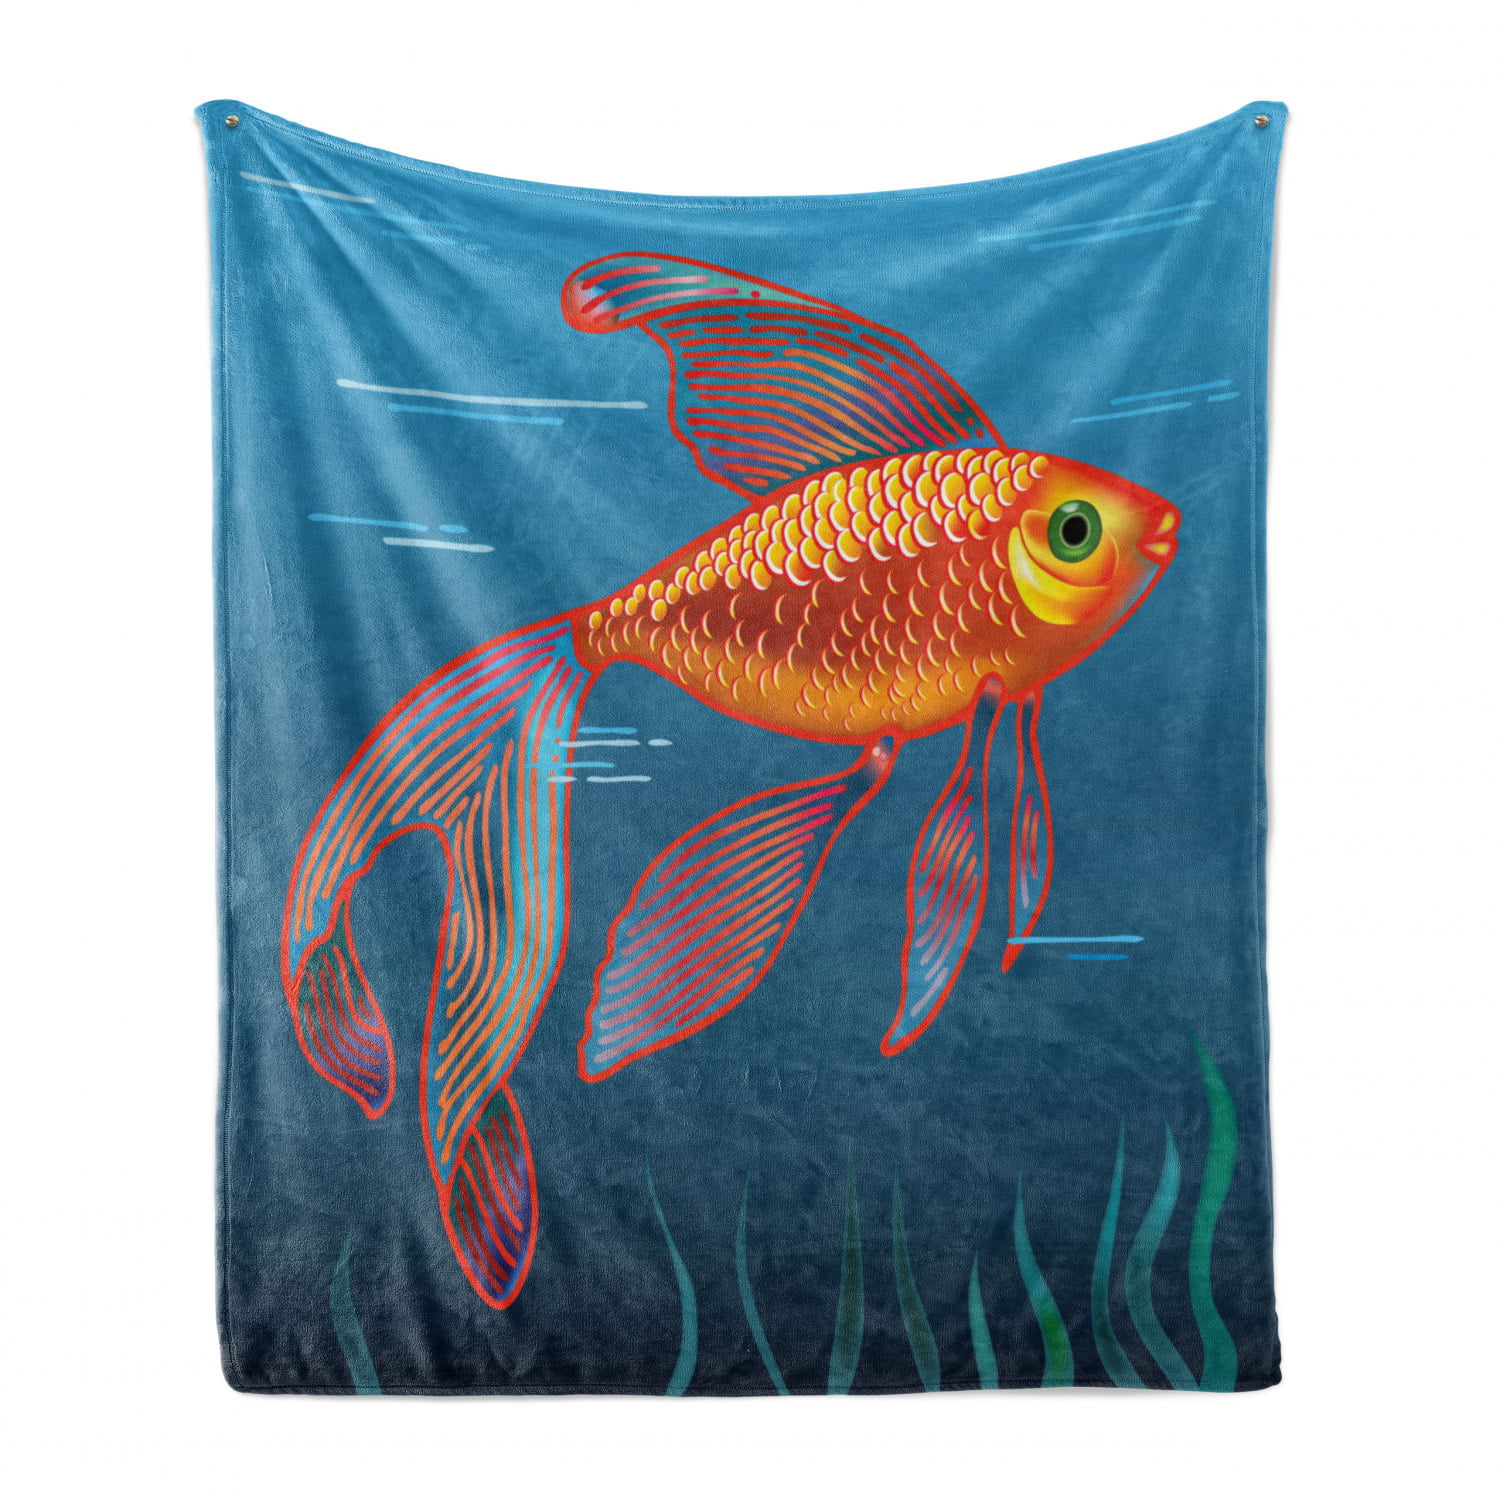 Scepticisme Krachtig Opstand Goldfish Soft Flannel Fleece Throw Blanket, Aquarium Illustration of Golden  Fish on Sea Water Background, Cozy Plush for Indoor and Outdoor Use, 70" x  90", Vermilion Orange, by Ambesonne - Walmart.com